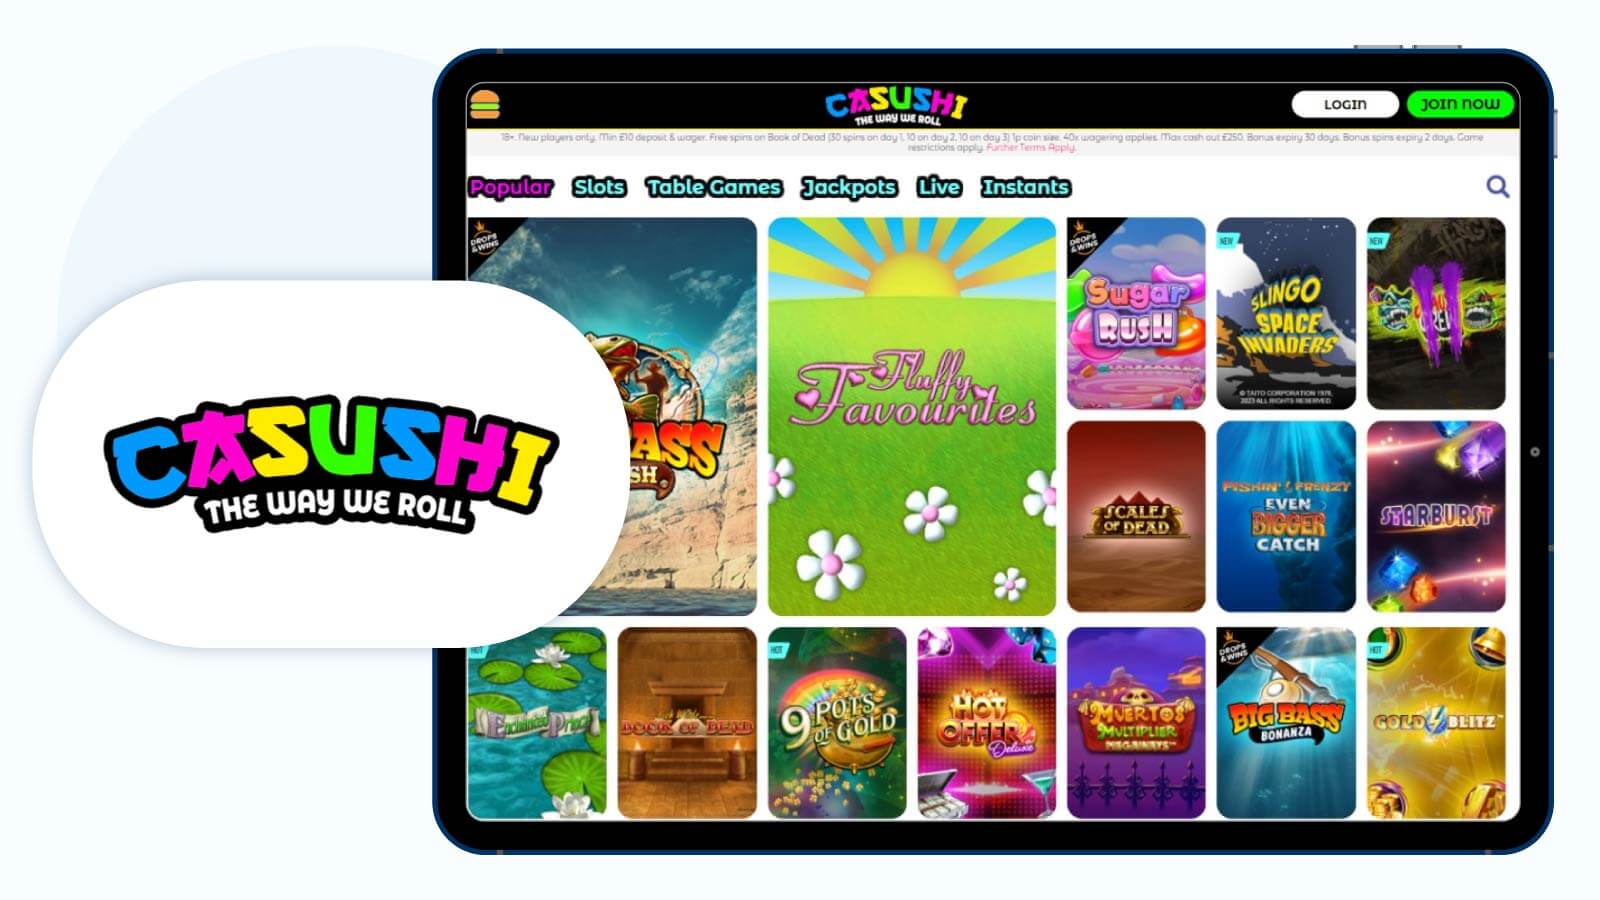 Casushi - Best NetEnt Casino for Fast Withdrawals